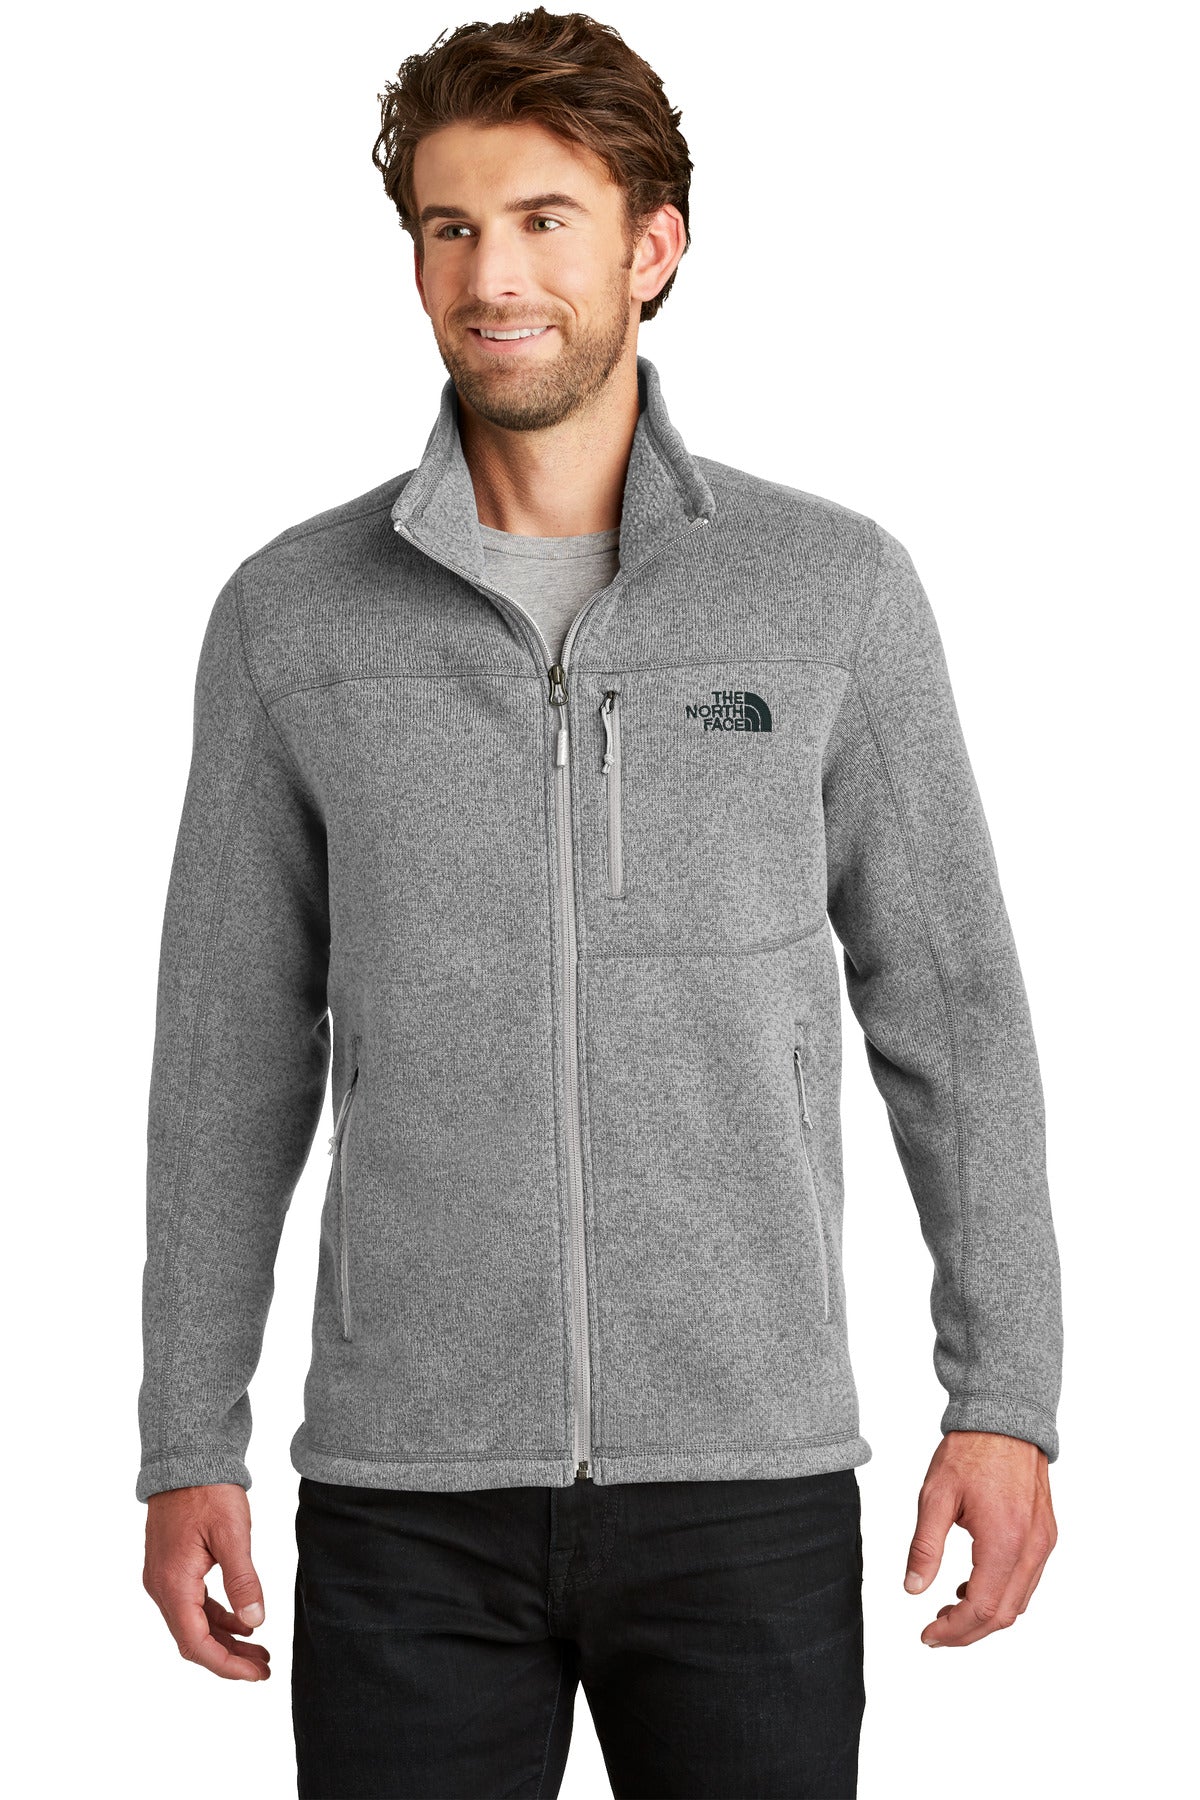 The North Face ® Sweater Fleece Jacket. NF0A3LH7 - DFW Impression